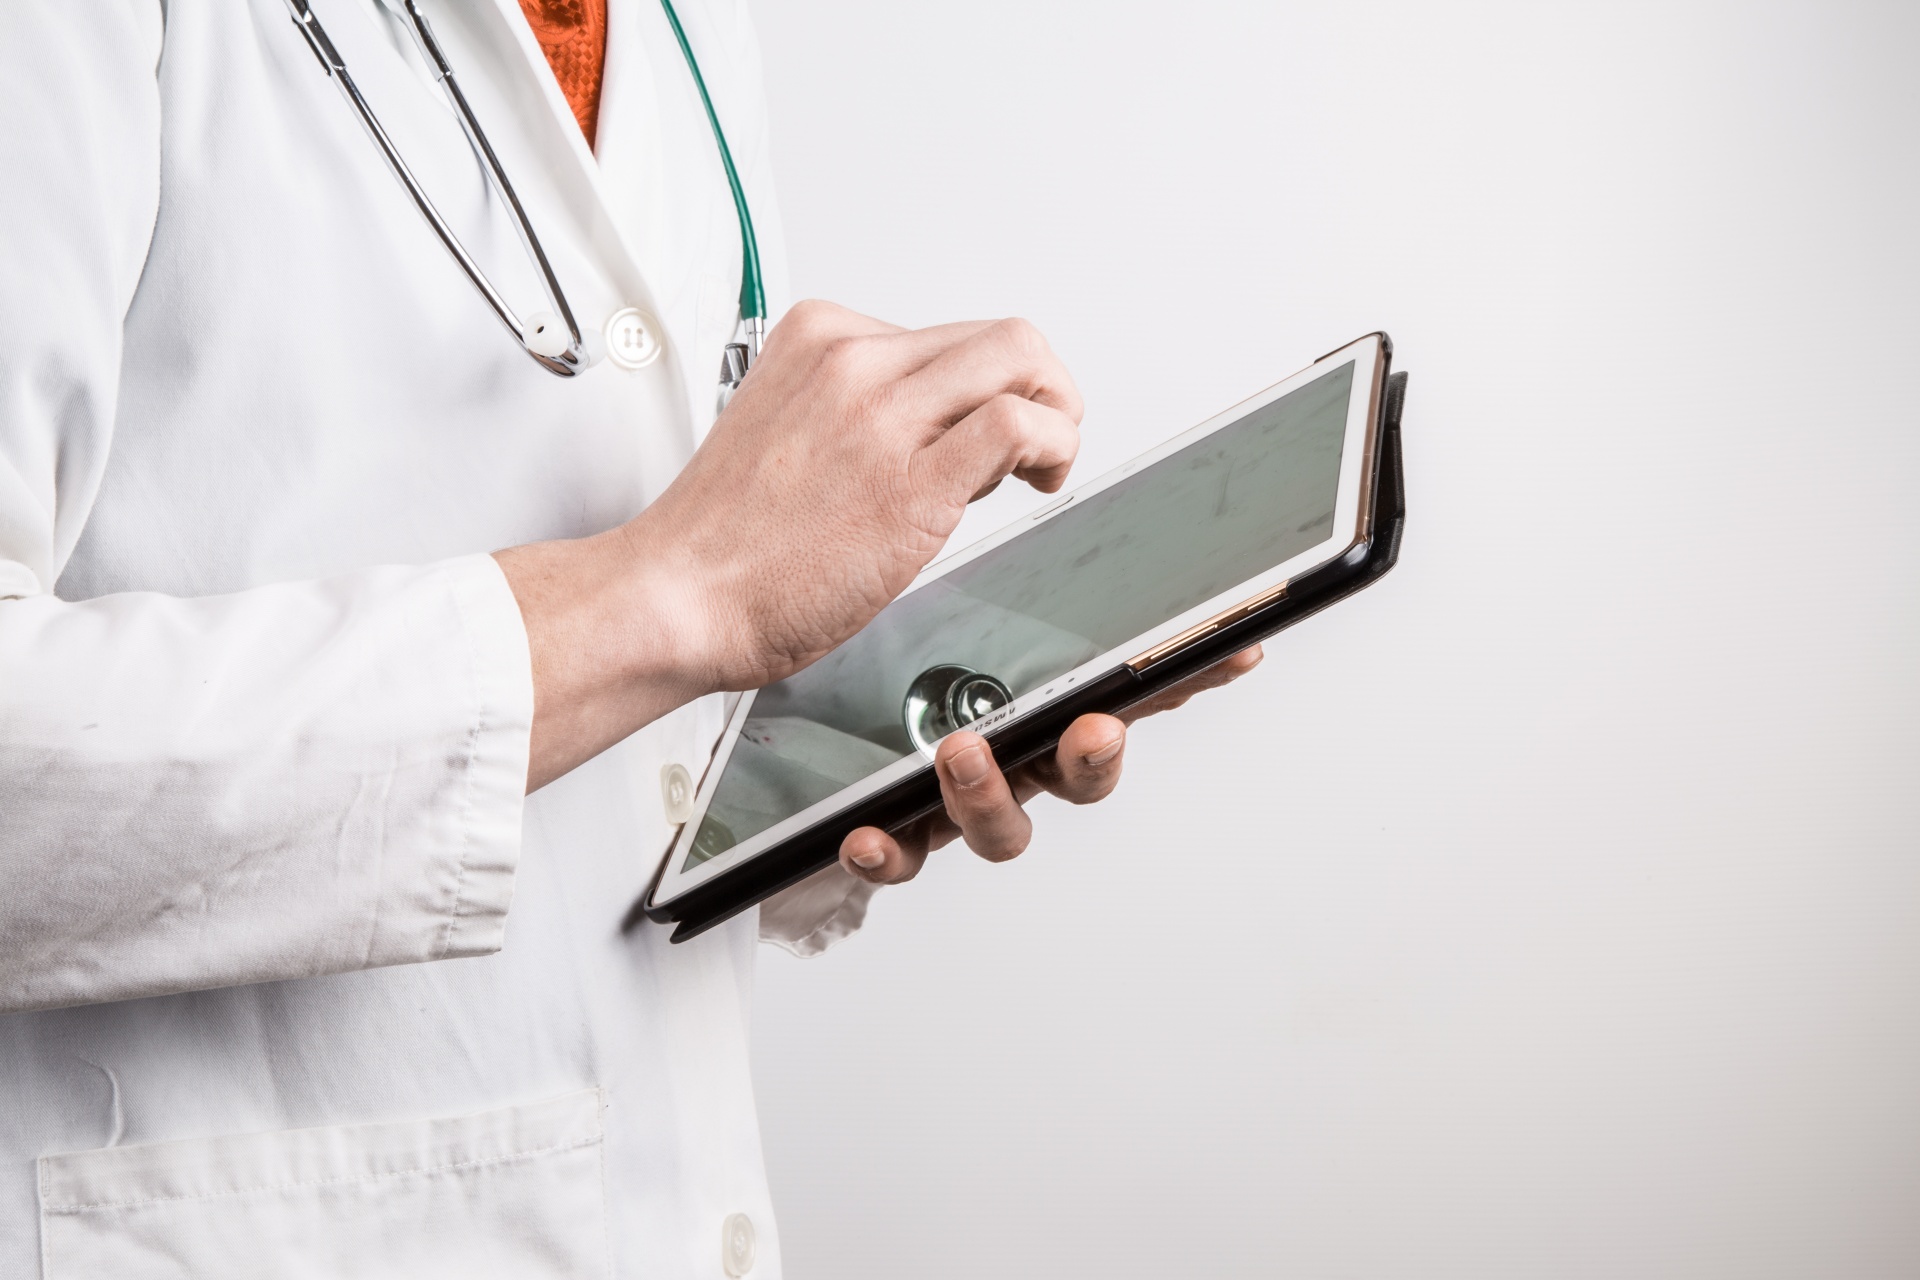 Doctor With Tablet